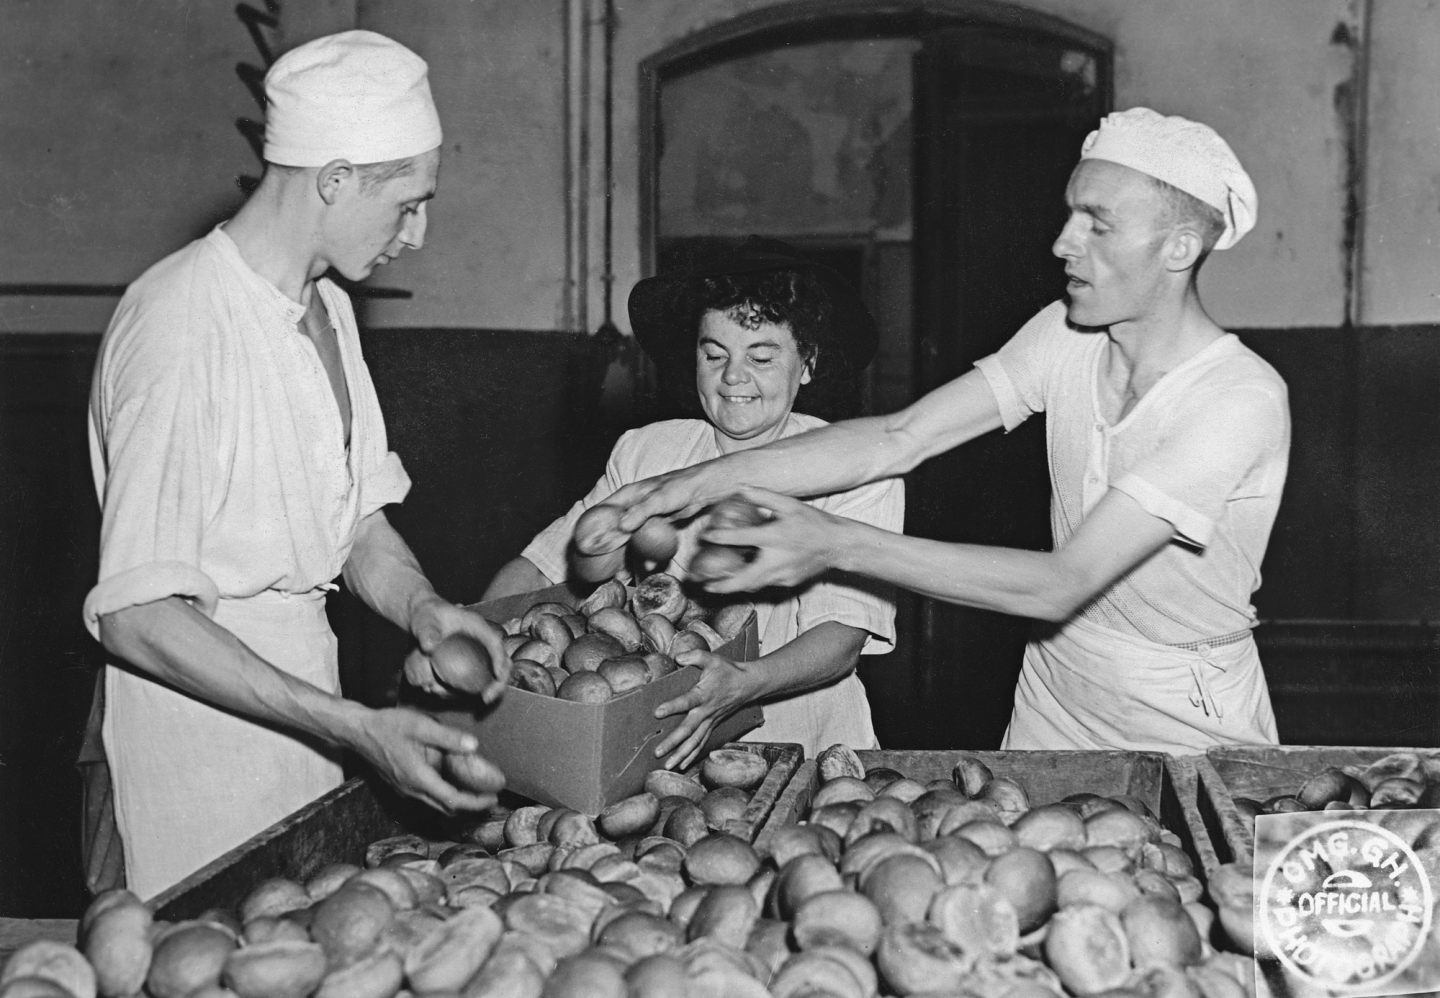 A black and white photo from teh 1940s of three people putting bread rolls into a box